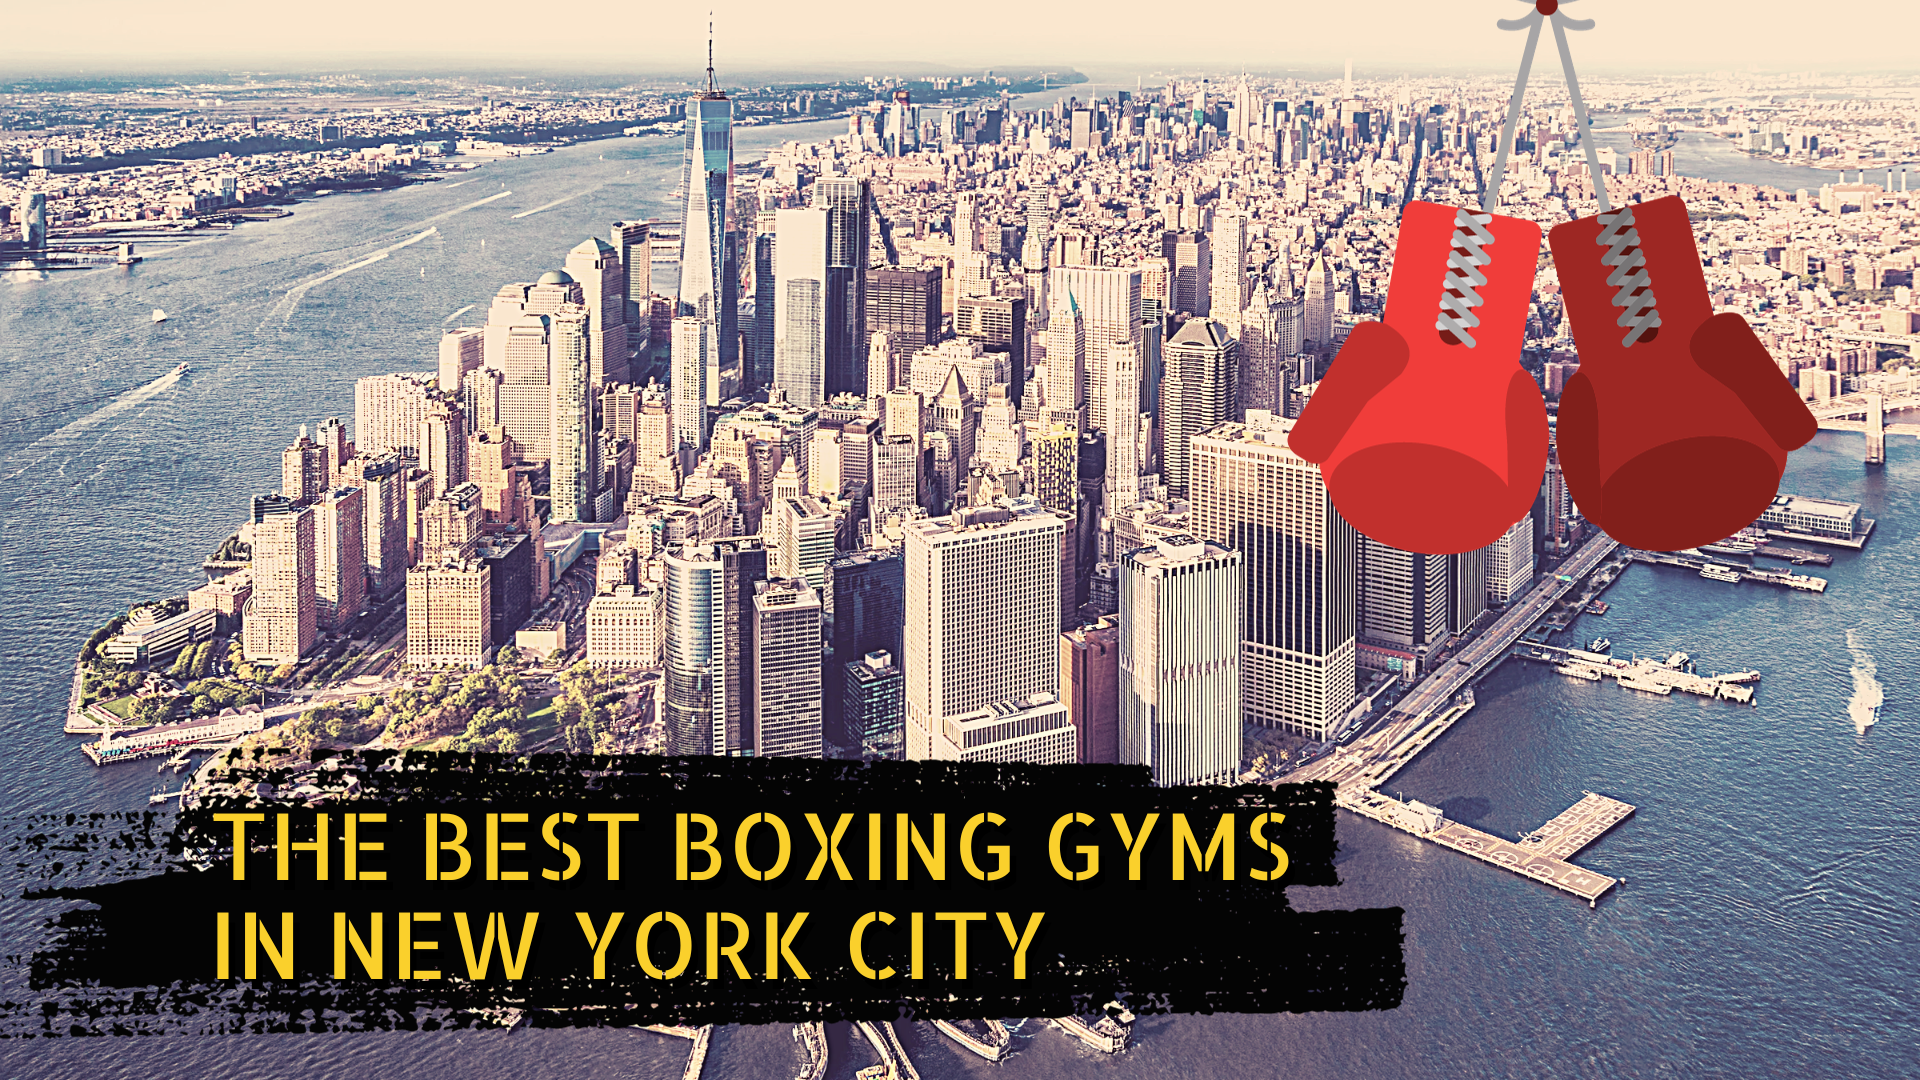 New York City skyline, some boxing gloves, and the title the best boxing gyms in New York City